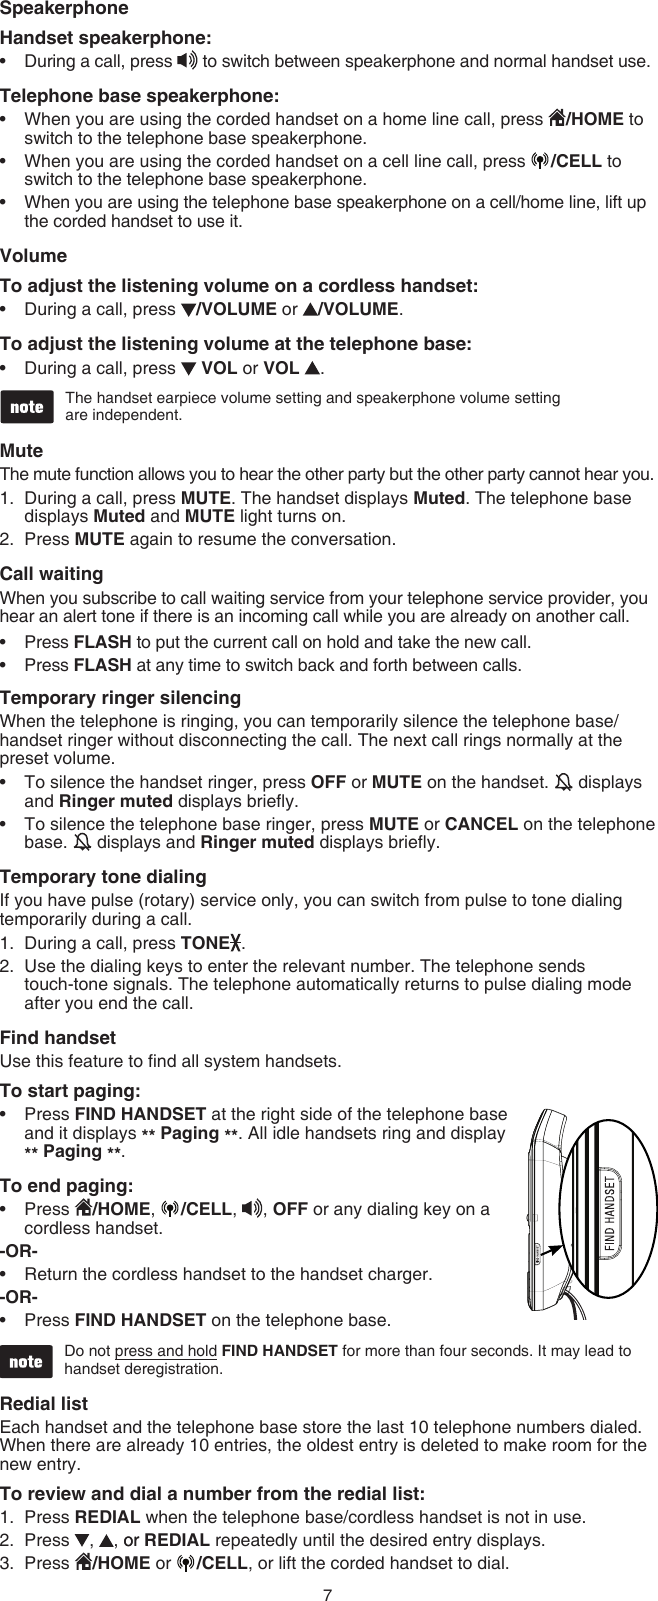 7SpeakerphoneHandset speakerphone:During a call, press   to switch between speakerphone and normal handset use.Telephone base speakerphone:When you are using the corded handset on a home line call, press  /HOME to switch to the telephone base speakerphone.When you are using the corded handset on a cell line call, press  /CELL to switch to the telephone base speakerphone.When you are using the telephone base speakerphone on a cell/home line, lift up the corded handset to use it.�olumeTo adjust the listening volume on a cordless handset:During a call, press  /�OLUME or  /�OLUME.To adjust the listening volume at the telephone base:During a call, press   �OL or �OL  .The handset earpiece volume setting and speakerphone volume setting  are independent.MuteThe mute function allows you to hear the other party but the other party cannot hear you.During a call, press MUTE. The handset displays Muted. The telephone base displays Muted and MUTE light turns on.Press MUTE again to resume the conversation.Call waitingWhen you subscribe to call waiting service from your telephone service provider, you hear an alert tone if there is an incoming call while you are already on another call.Press FLASH to put the current call on hold and take the new call.Press FLASH at any time to switch back and forth between calls.Temporary ringer silencingWhen the telephone is ringing, you can temporarily silence the telephone base/handset ringer without disconnecting the call. The next call rings normally at the preset volume.To silence the handset ringer, press OFF or MUTE on the handset.   displays and Ringer muted displays briey.To silence the telephone base ringer, press MUTE or CANCEL on the telephone base.   displays and Ringer muted displays briey.Temporary tone dialingIf you have pulse (rotary) service only, you can switch from pulse to tone dialing temporarily during a call.During a call, press TONE .Use the dialing keys to enter the relevant number. The telephone sends  touch-tone signals. The telephone automatically returns to pulse dialing mode after you end the call.Find handsetUse this feature to nd all system handsets.To start paging:Press FIND HANDSET at the right side of the telephone base and it displays ** Paging **. All idle handsets ring and display  ** Paging **.To end paging:Press  /HOME,  /CELL, , OFF or any dialing key on a cordless handset.-OR-Return the cordless handset to the handset charger.-OR-Press FIND HANDSET on the telephone base.Do not press and hold FIND HANDSET for more than four seconds. It may lead to  handset deregistration.Redial list Each handset and the telephone base store the last 10 telephone numbers dialed. When there are already 10 entries, the oldest entry is deleted to make room for the new entry.To review and dial a number from the redial list:Press REDIAL when the telephone base/cordless handset is not in use.Press  ,  , oror REDIAL repeatedly until the desired entry displays.Press  /HOME or  /CELL, or lift the corded handset to dial.••••••1.2.••••1.2.••••1.2.3.